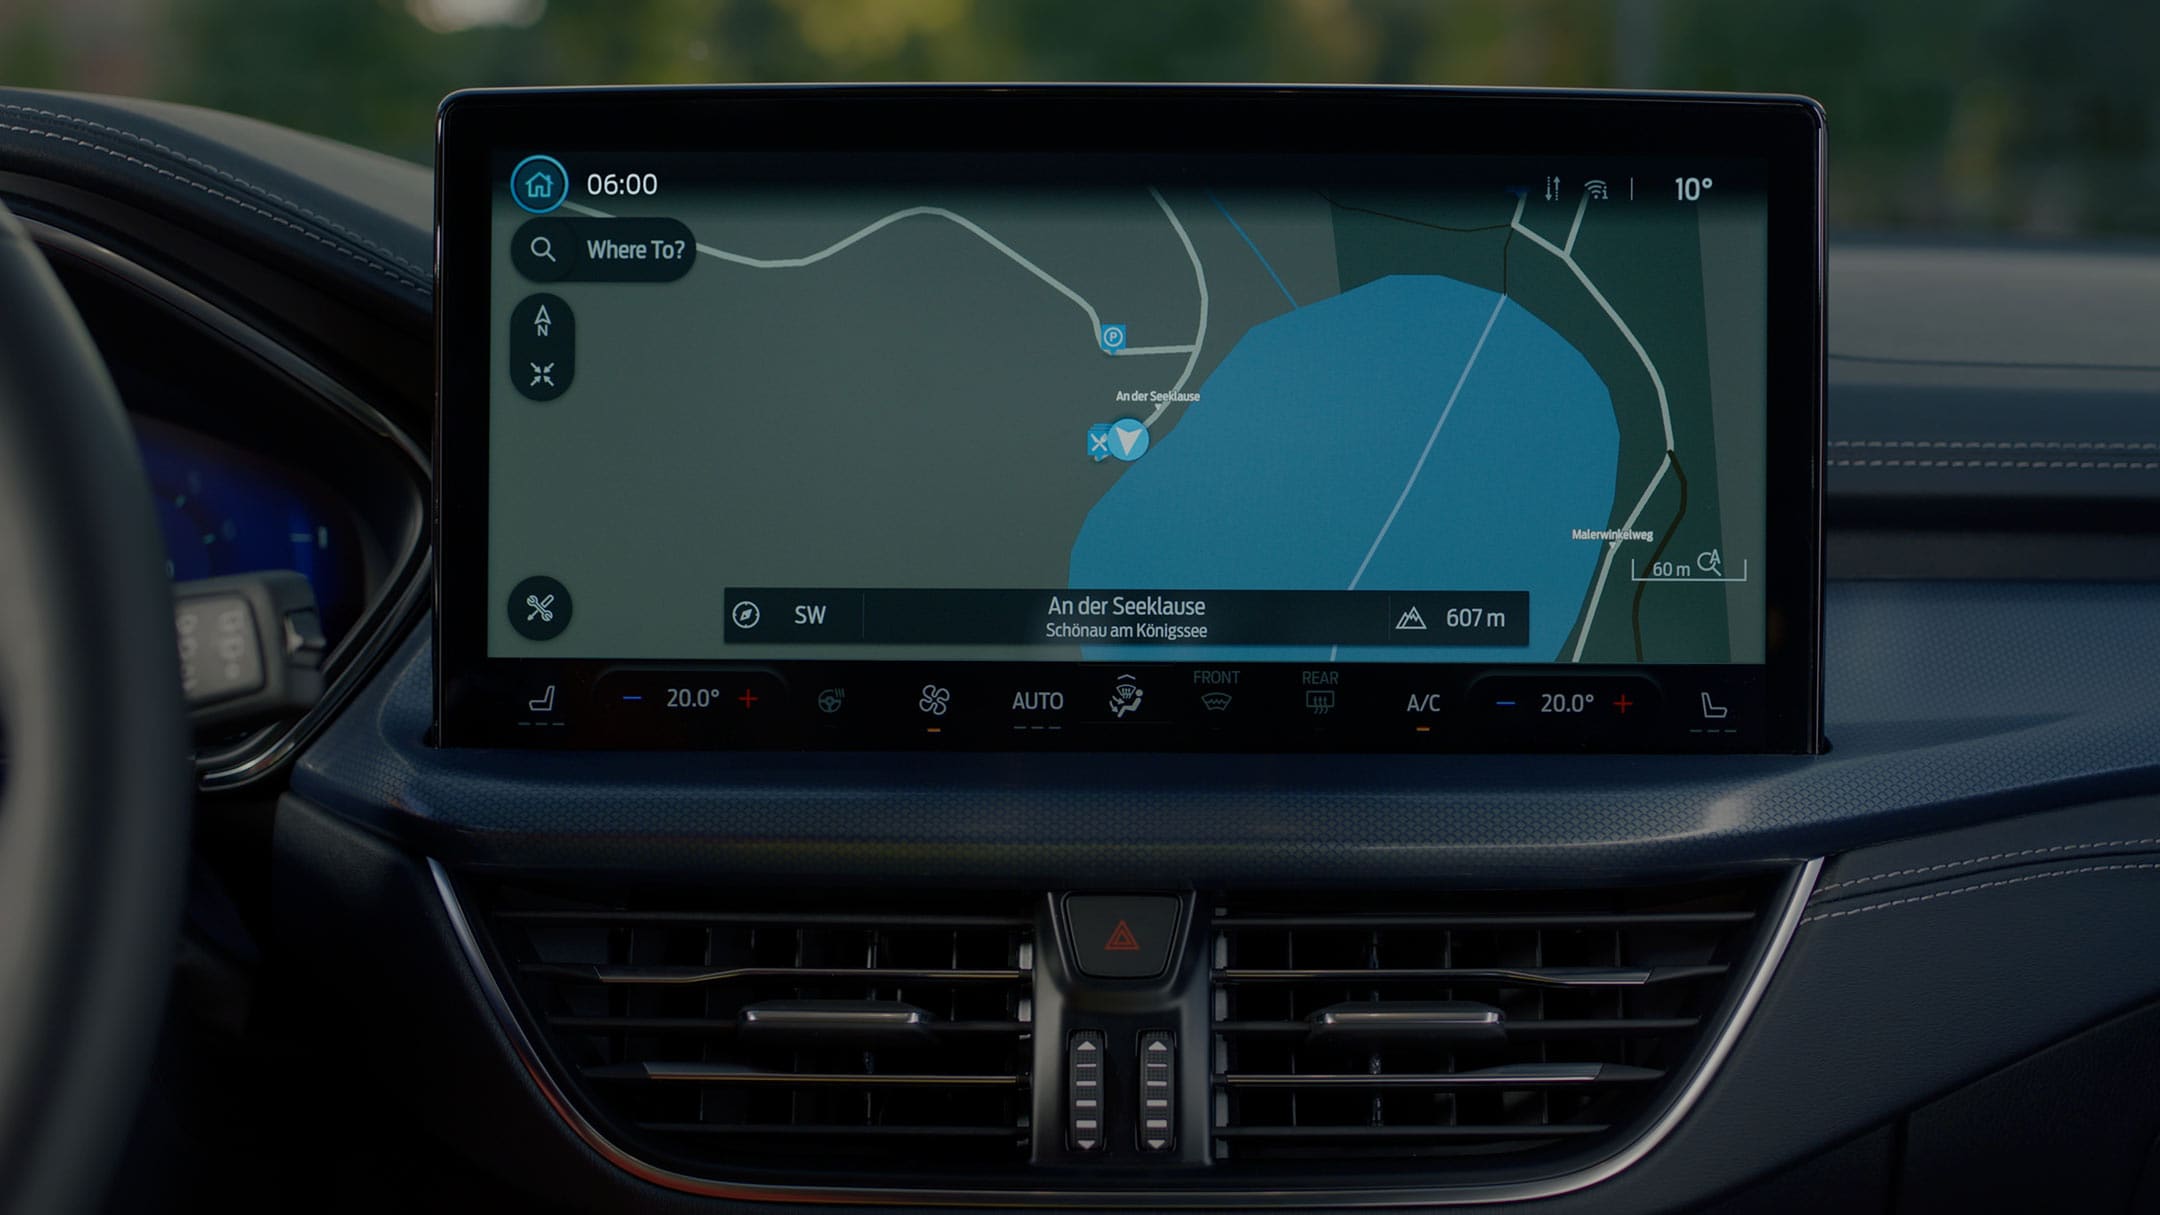 Ford Focus ST - Connected Navigation.